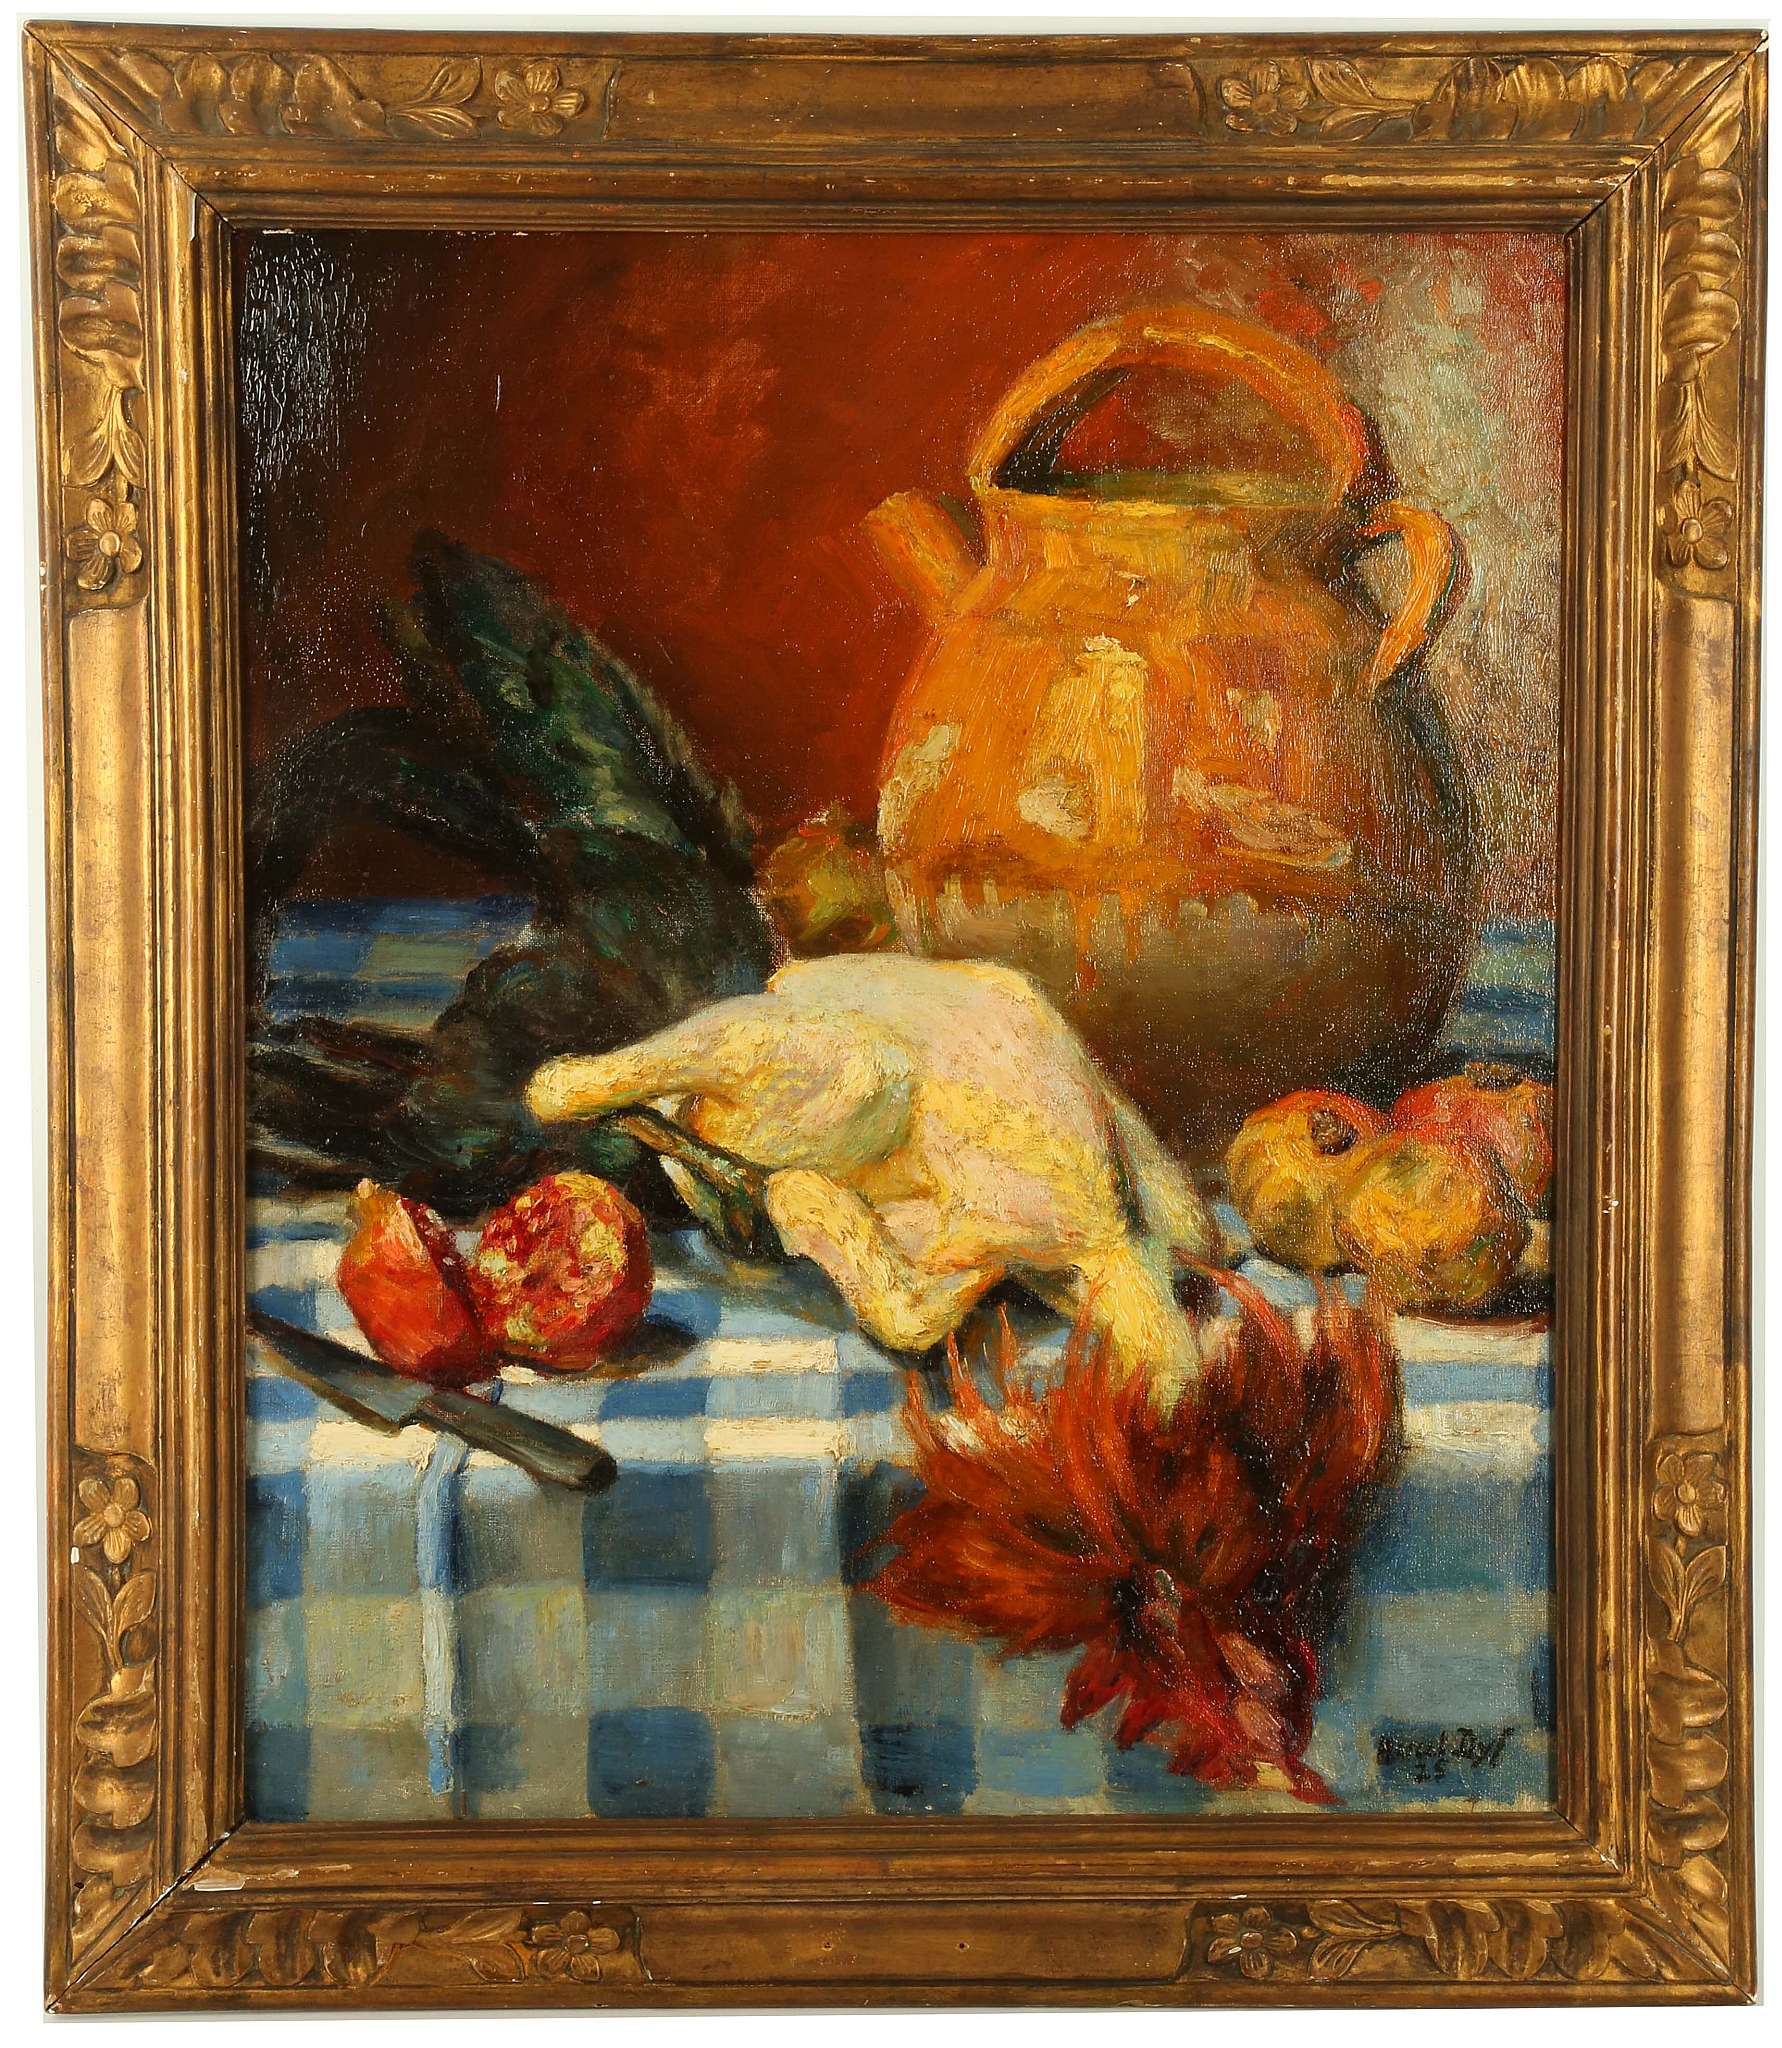 MARCEL DYF 1899-1985. Still life 'Poulet and Pomegranate'. Oil on canvas, signed lower right and